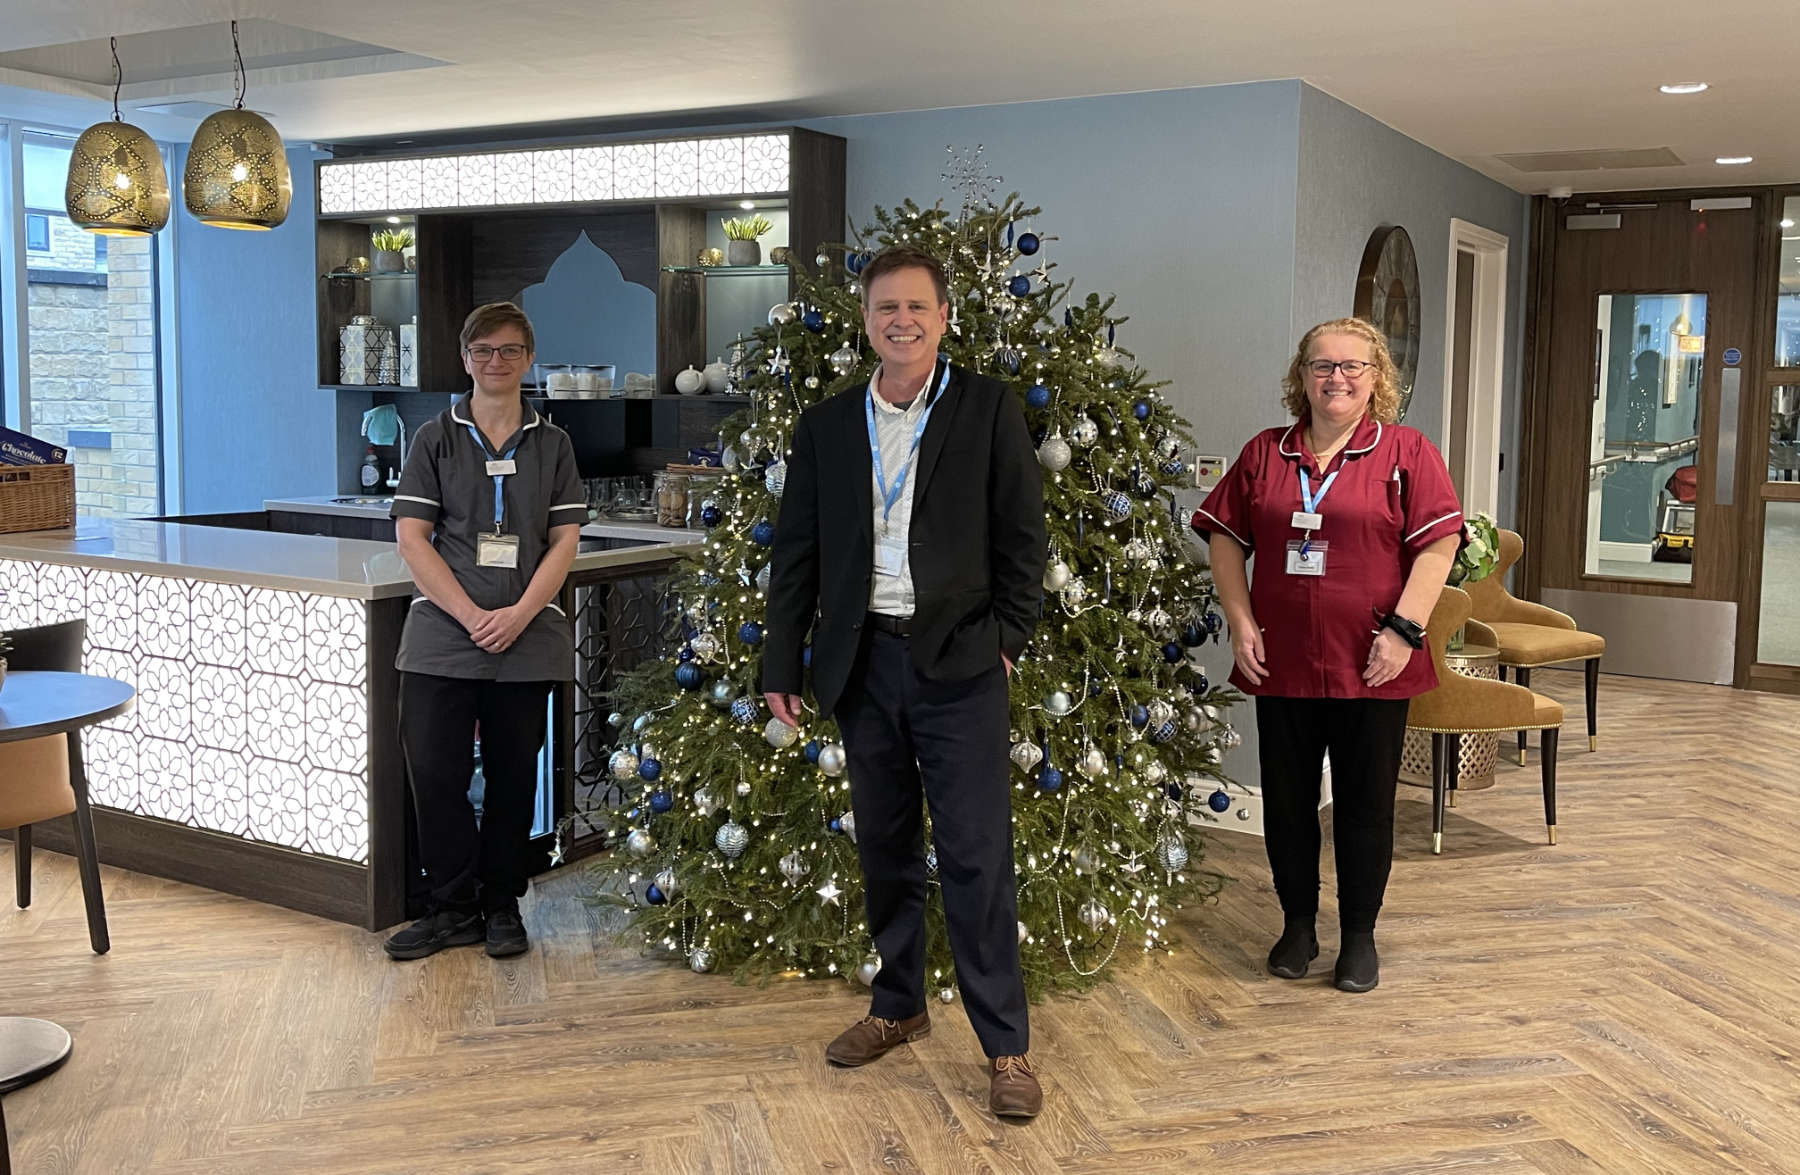 Nicola Goodsall our Deputy Manager, Nigel Allen our Home manager and Head of Housekeeping Tracey Avery